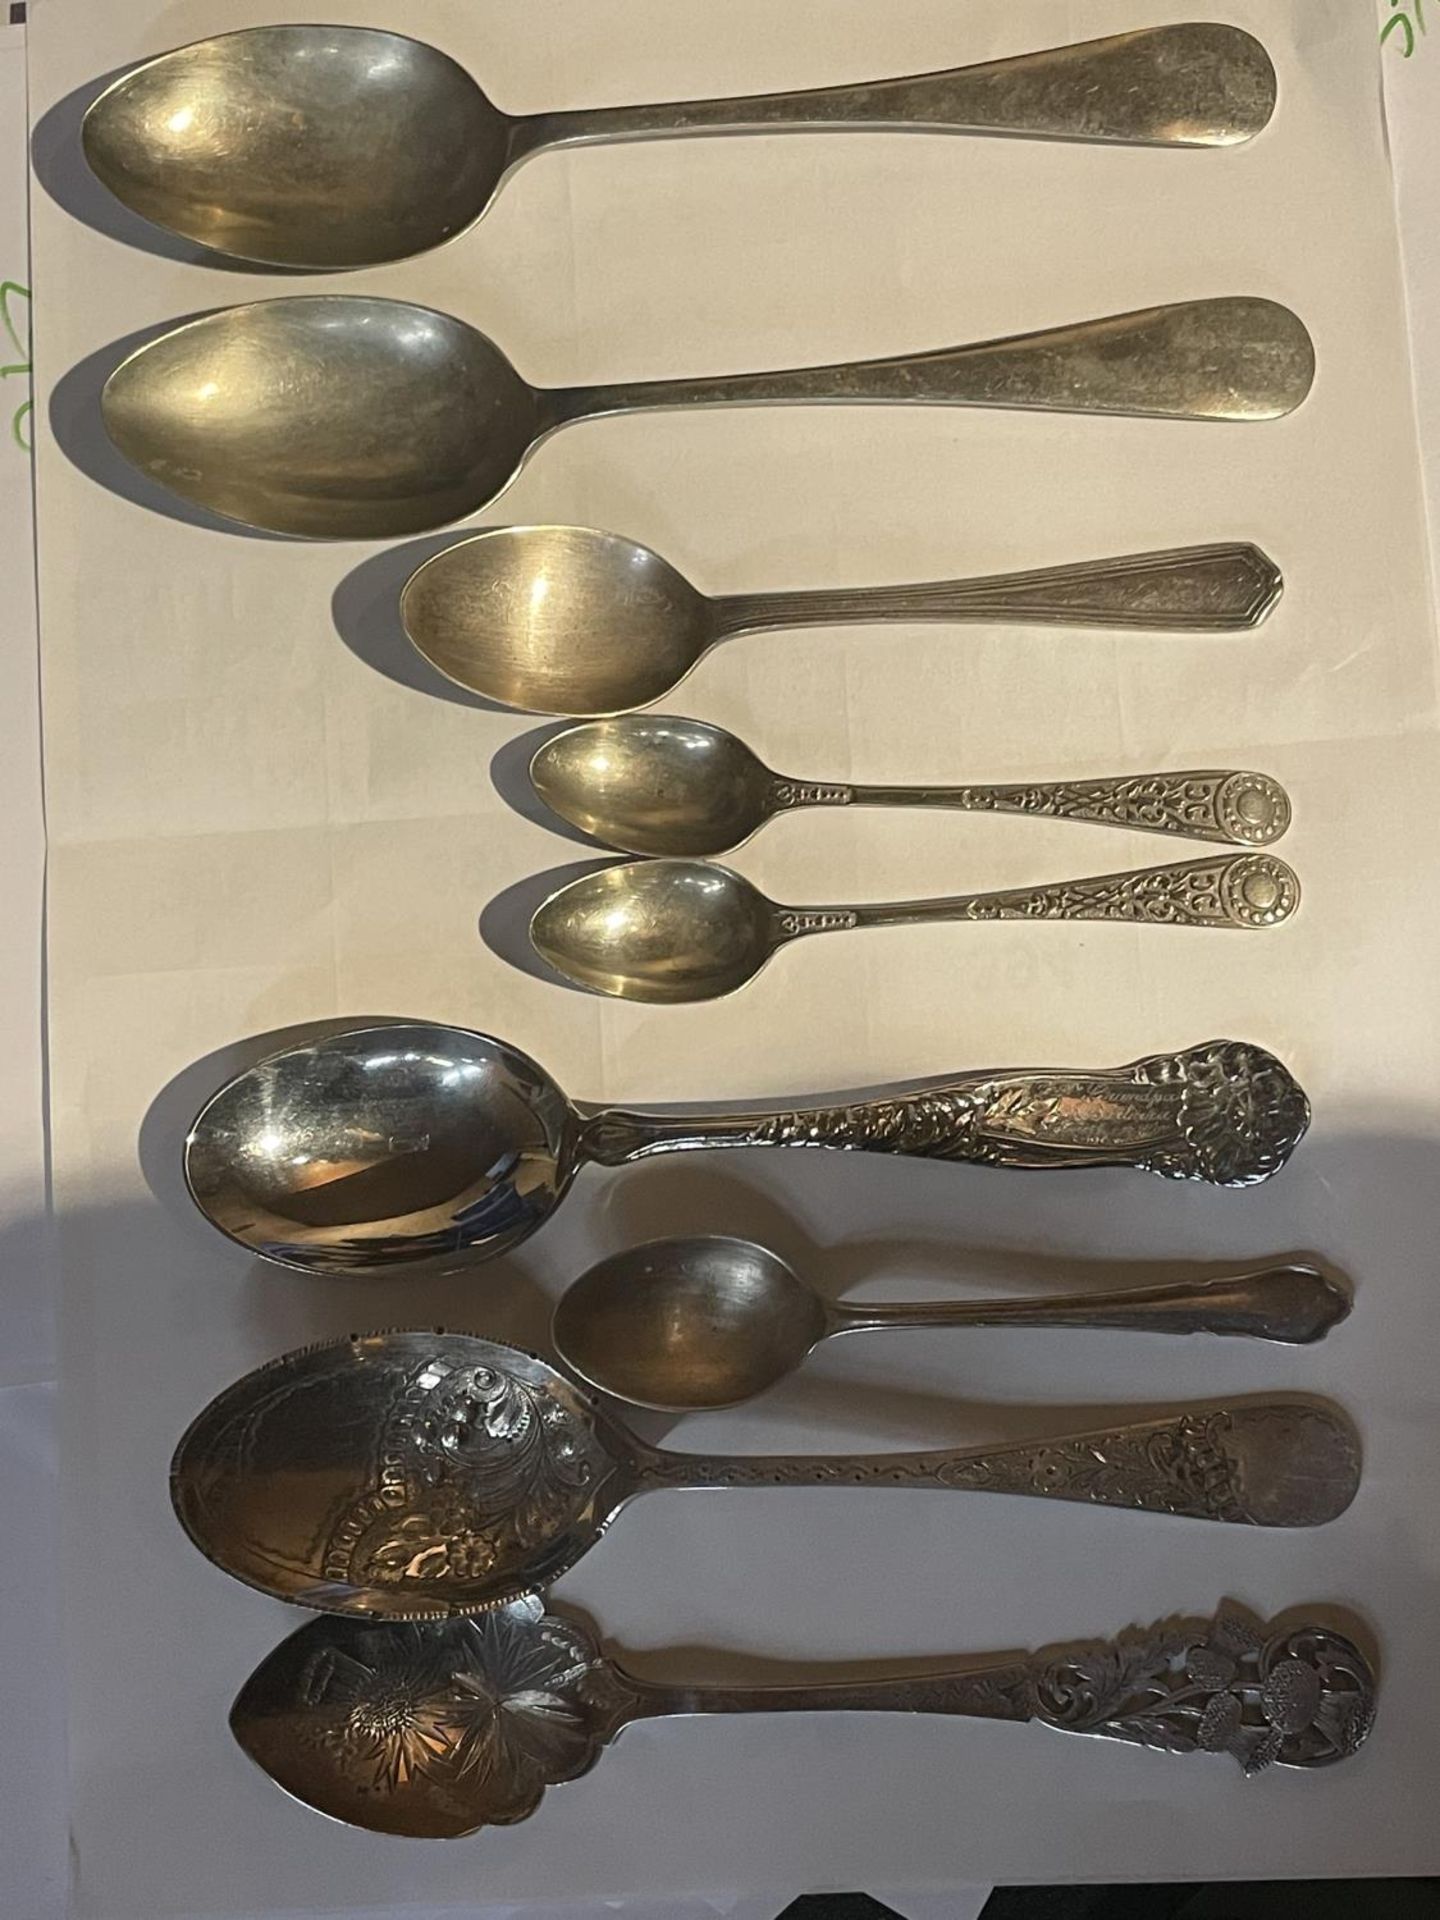 NINE VARIOUS SPOONS TO INCLUDE DECORATIVE SILVER PLATED EXAMPLES